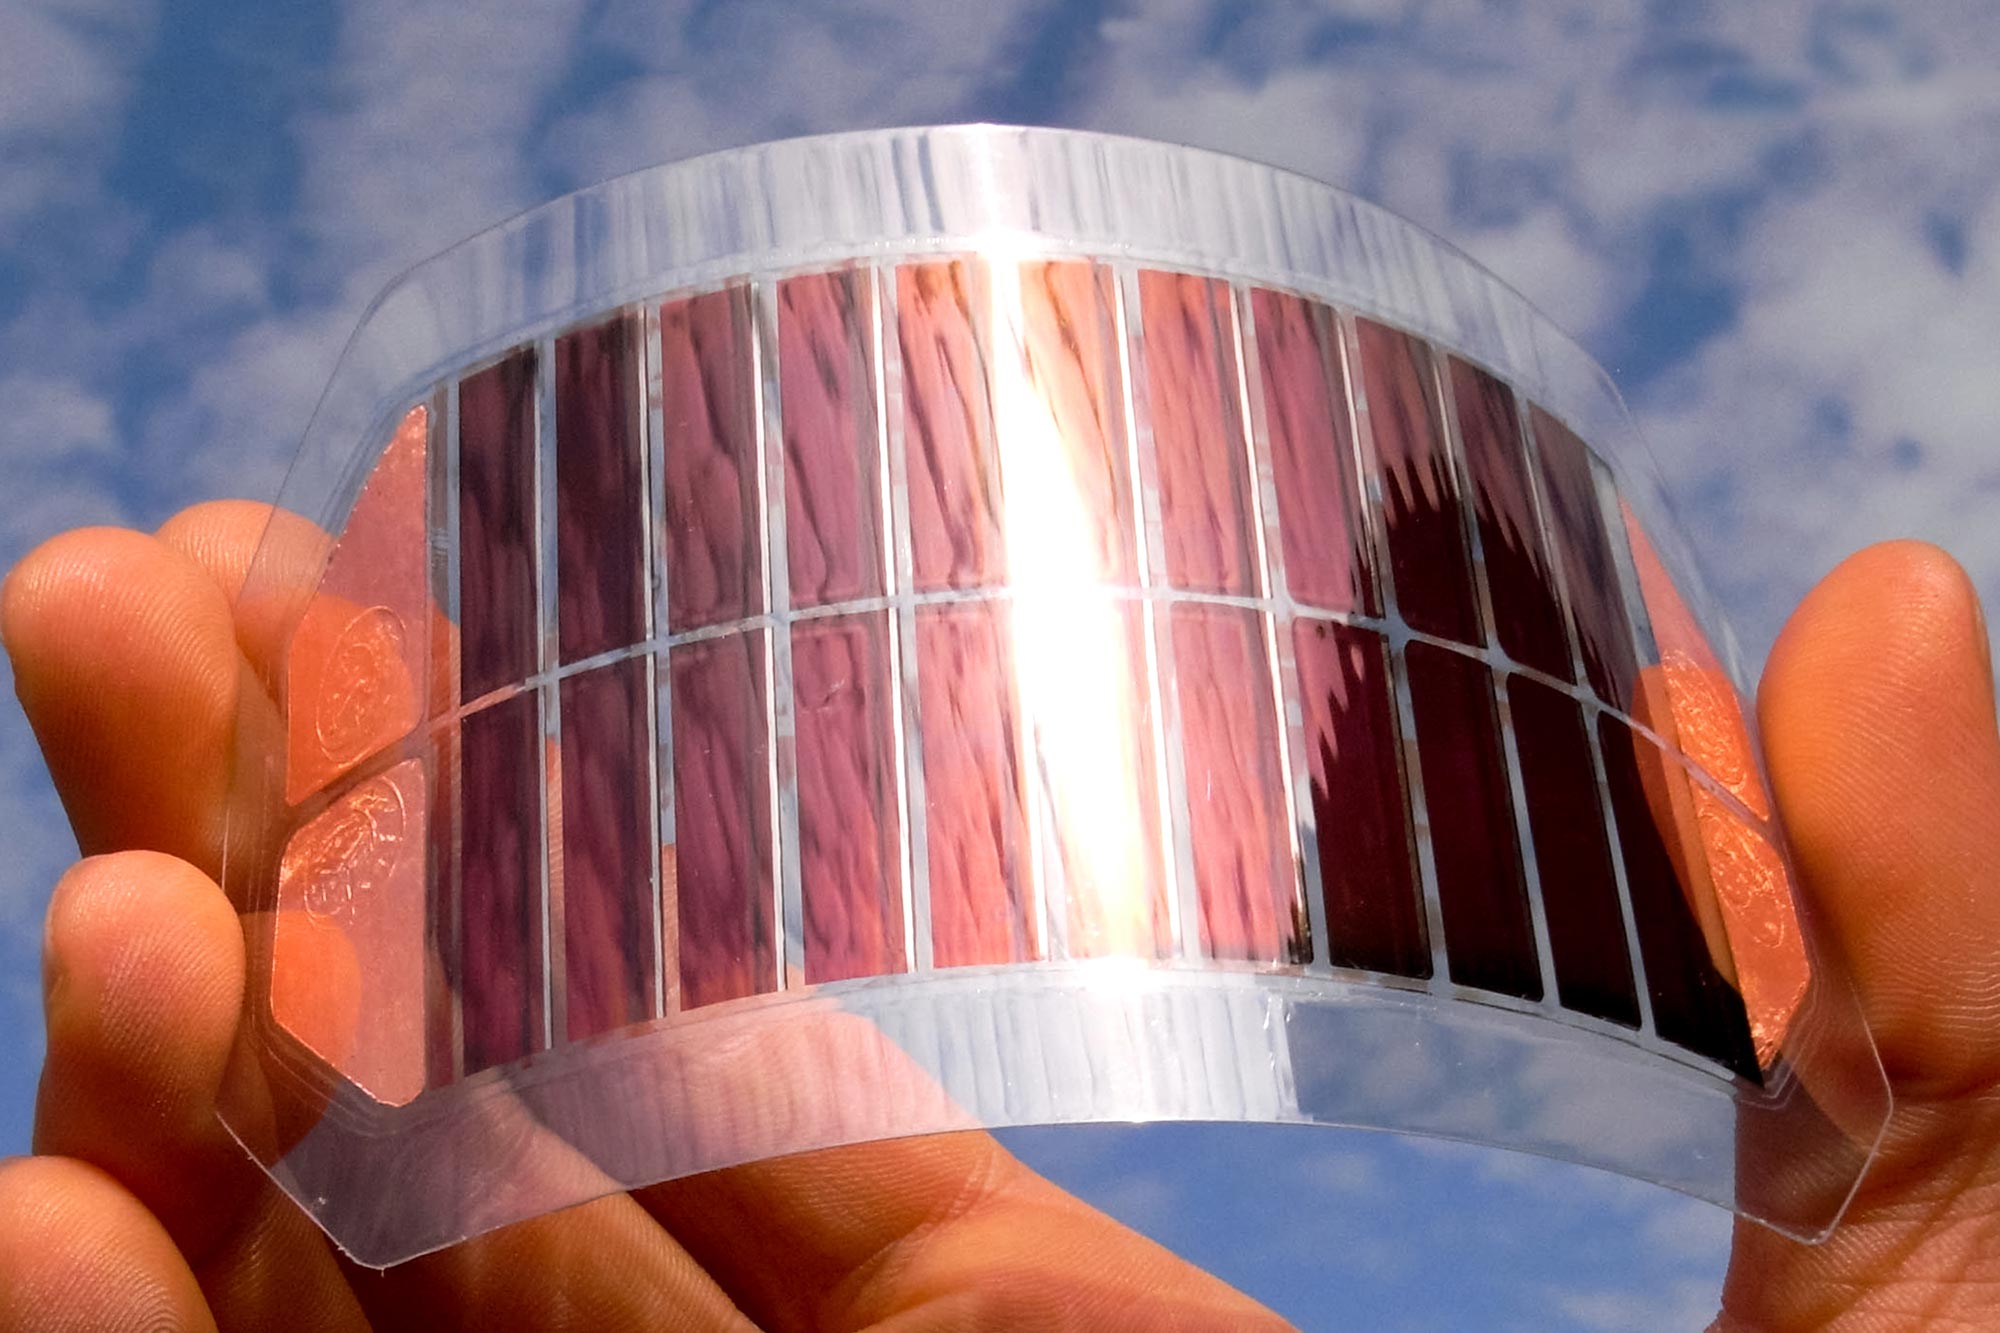 Two Layers Are Better Than One for Efficient Solar Cells â€“ Affordable, Thin Film Solar Cells With 34% Efficiency - SciTechDaily